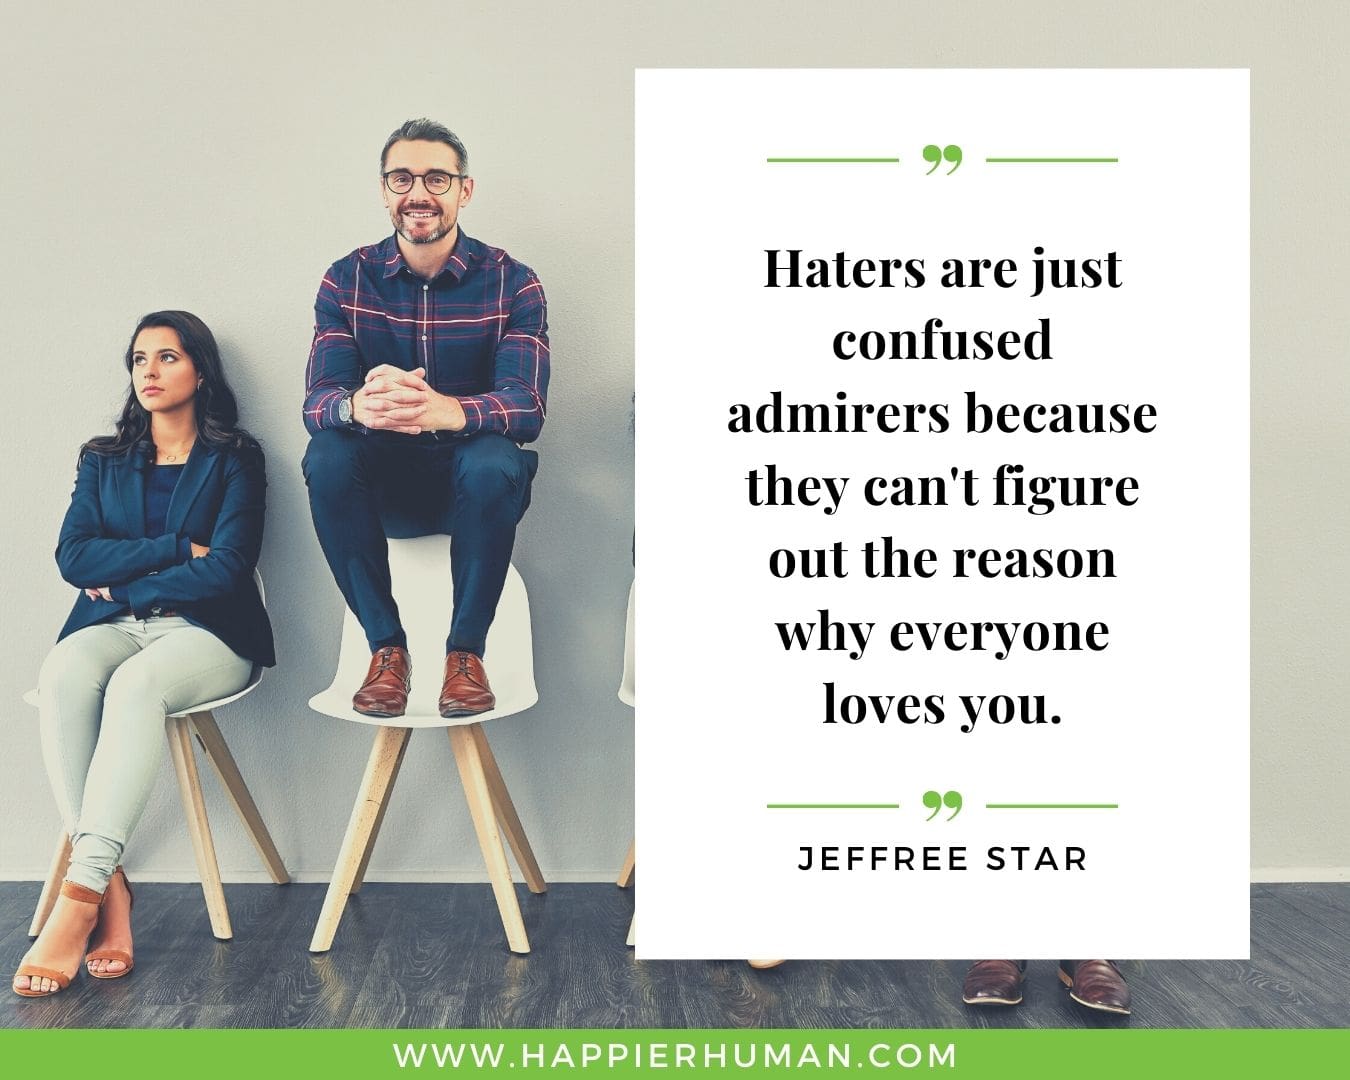 Haters Quotes - “Haters are just confused admirers because they can't figure out the reason why everyone loves you.” - Jeffree Star